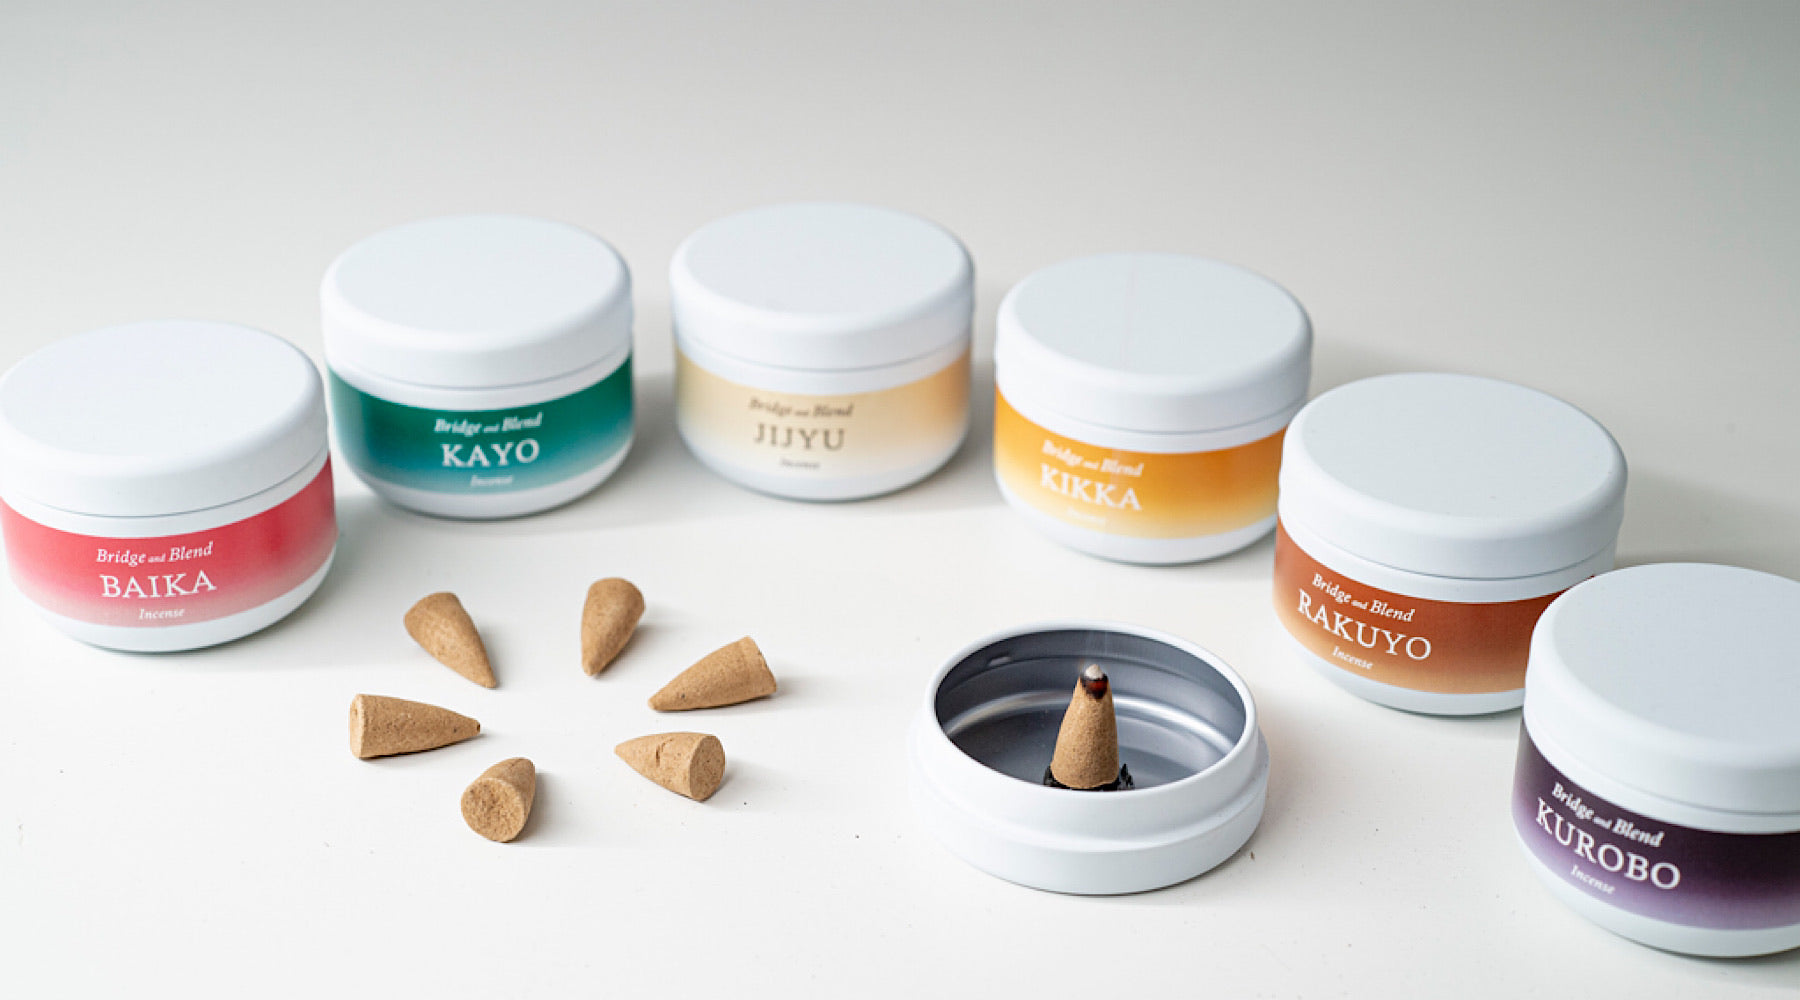 Bridge and Blend Introduces Incense Inspired  by 1000-Year-Old Japanese Blends